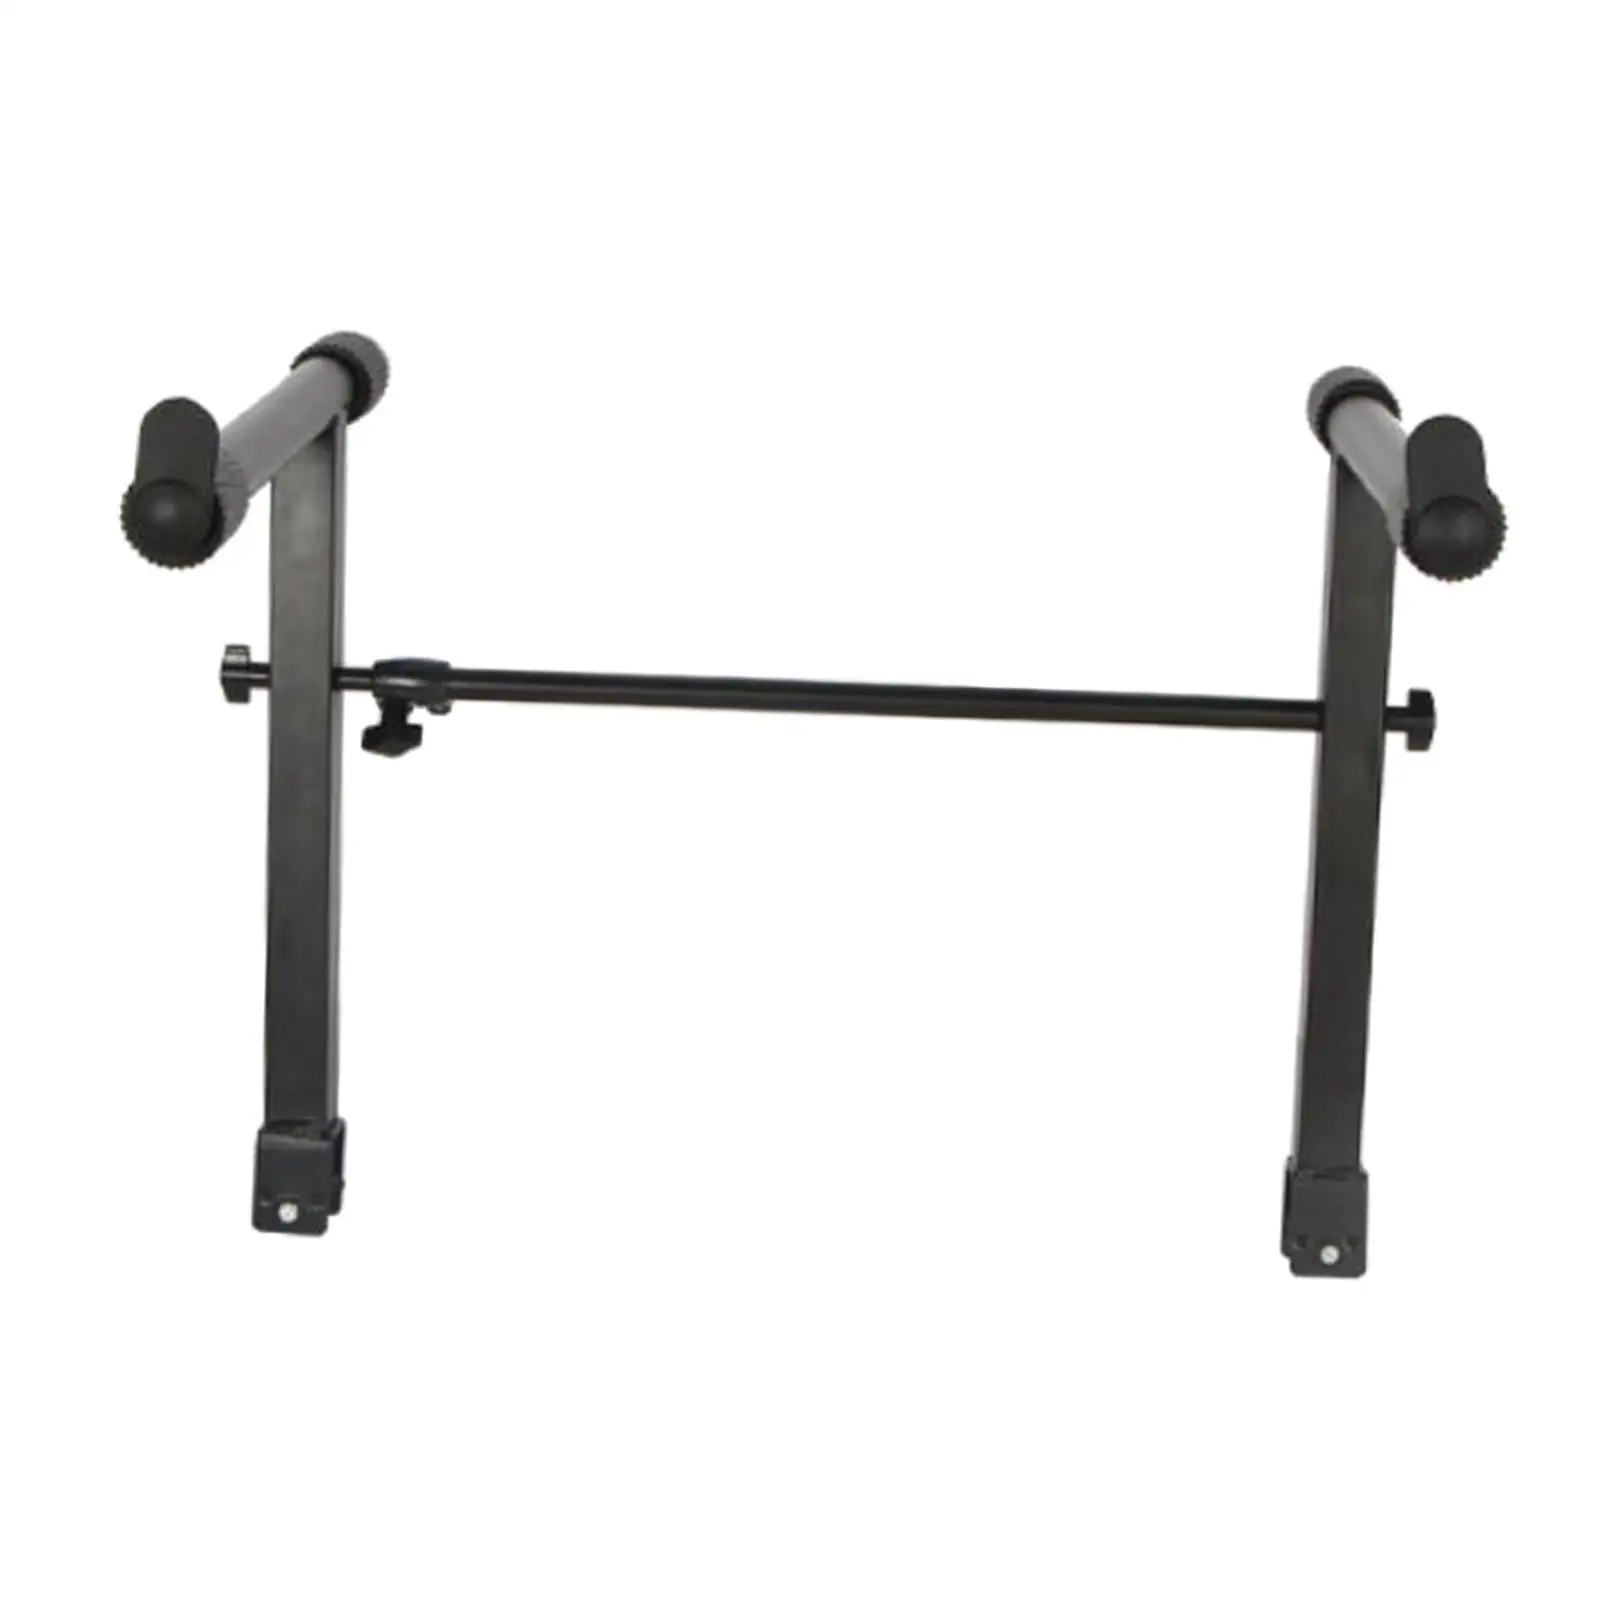 Musical Keyboard Stand Keyboard Stand Extension for Keyboard Instrument Part